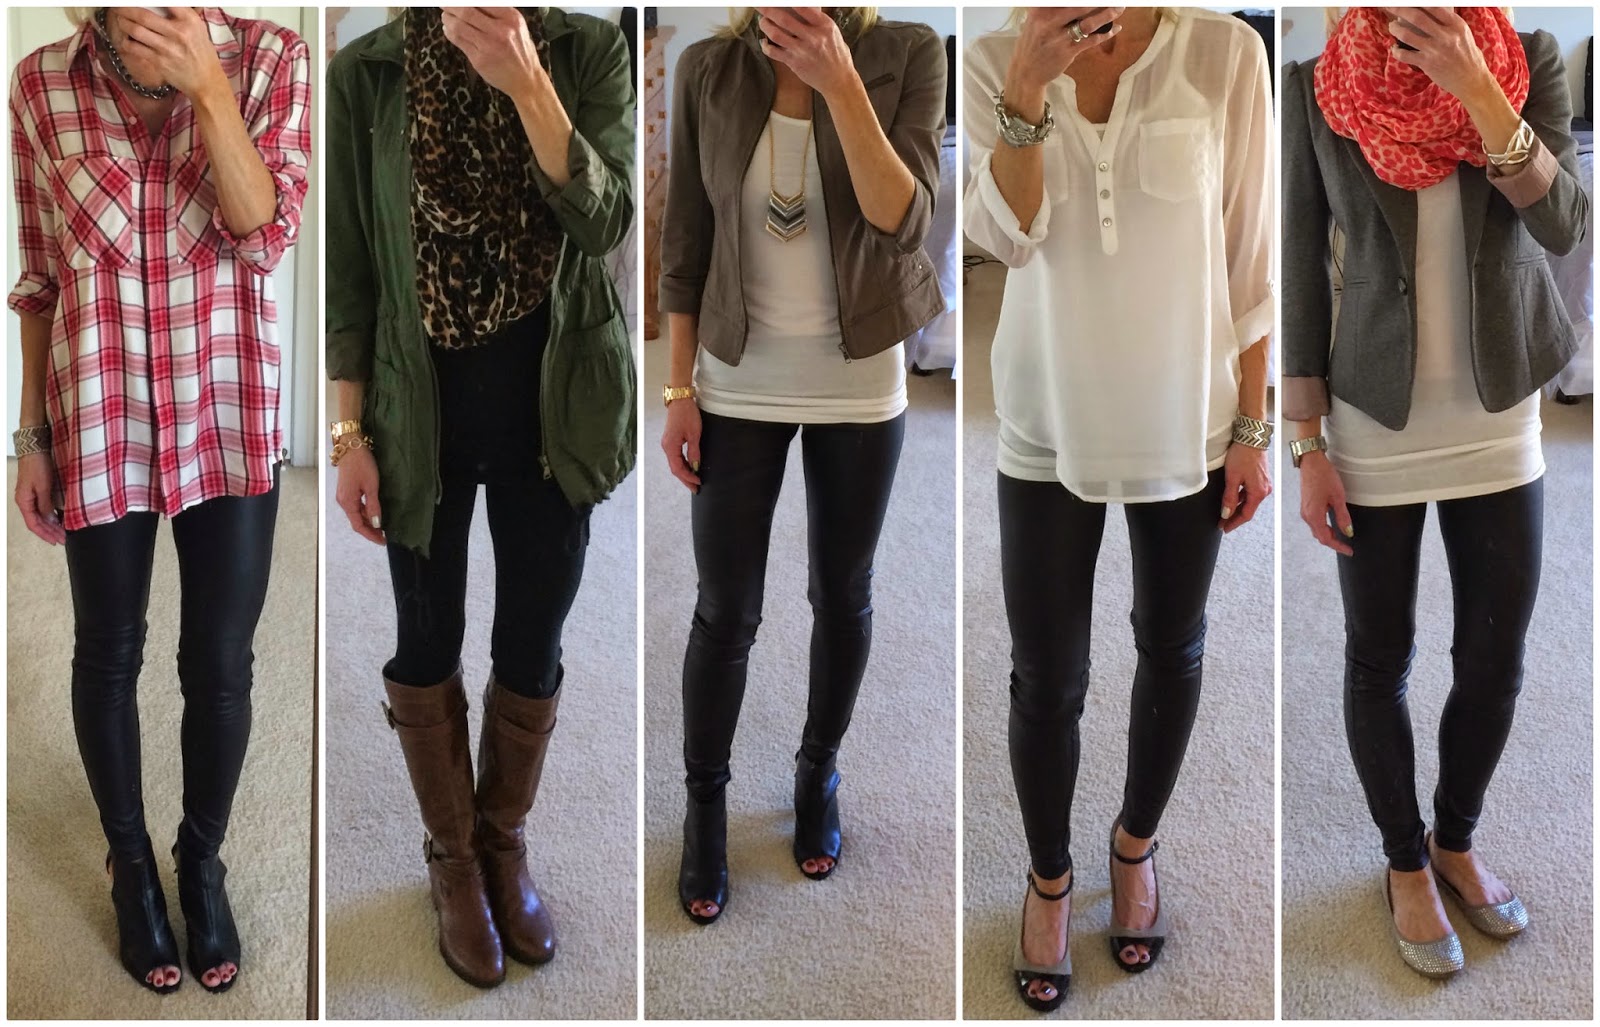 tops to wear with leggings how to wear faux leather, scuba, leder leggings, outfit options, ways to AHQPOVE